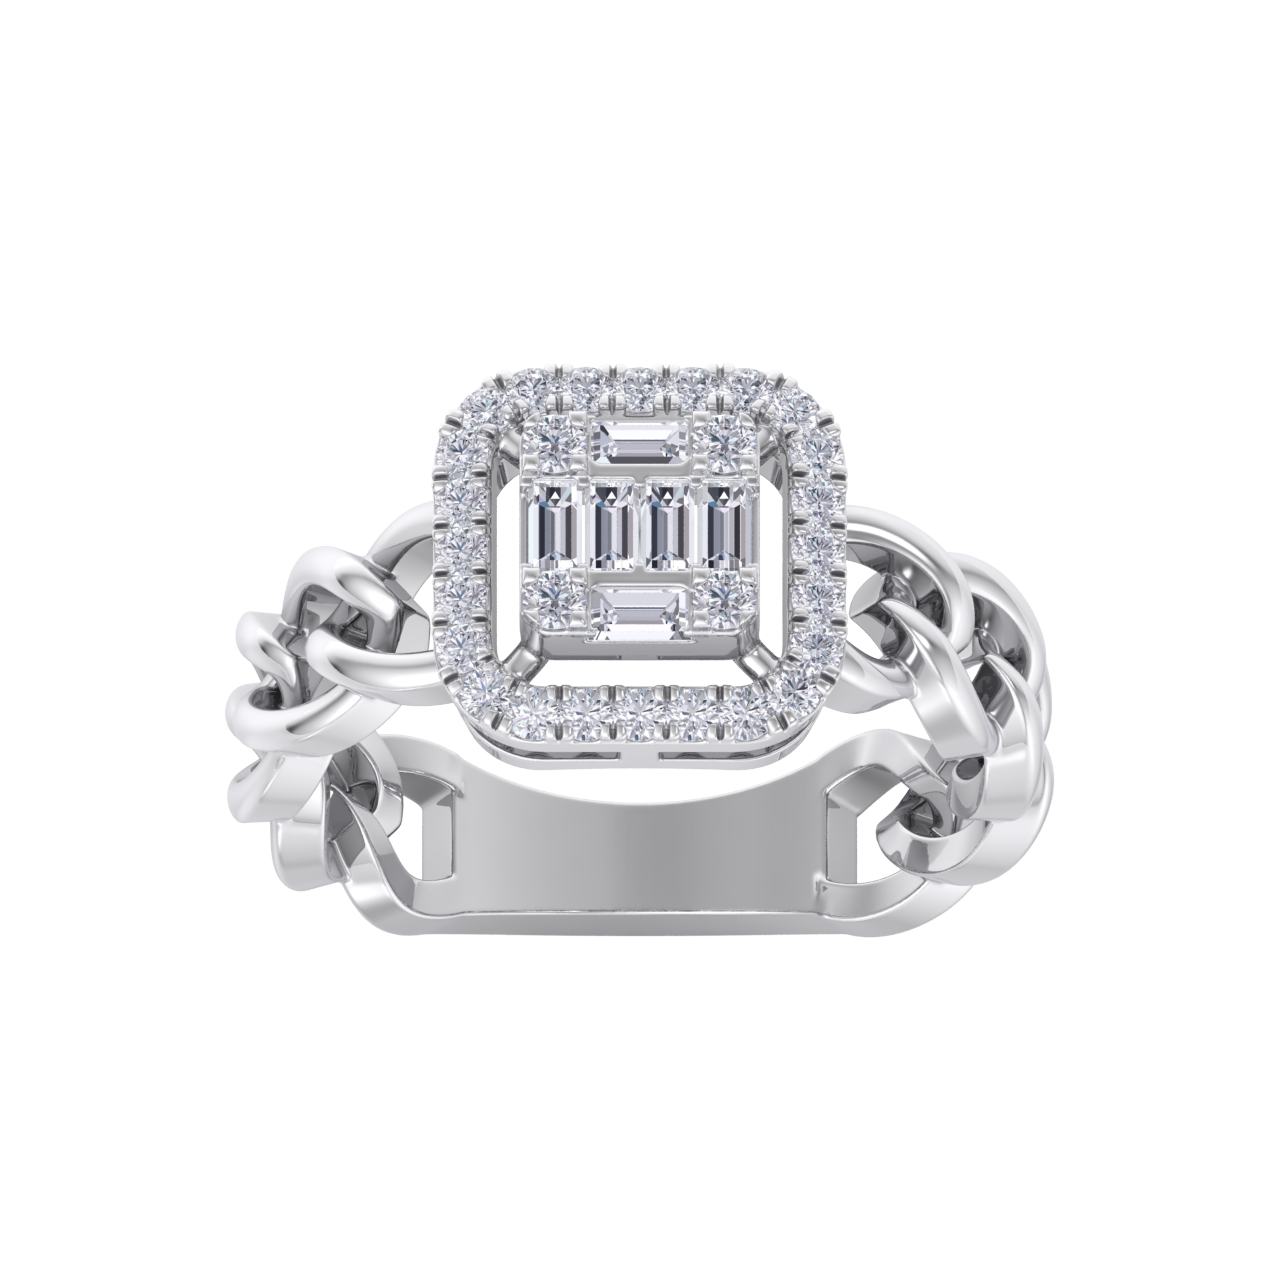 Statement Chain Ring in white gold with white diamonds of 0.41 ct in weight